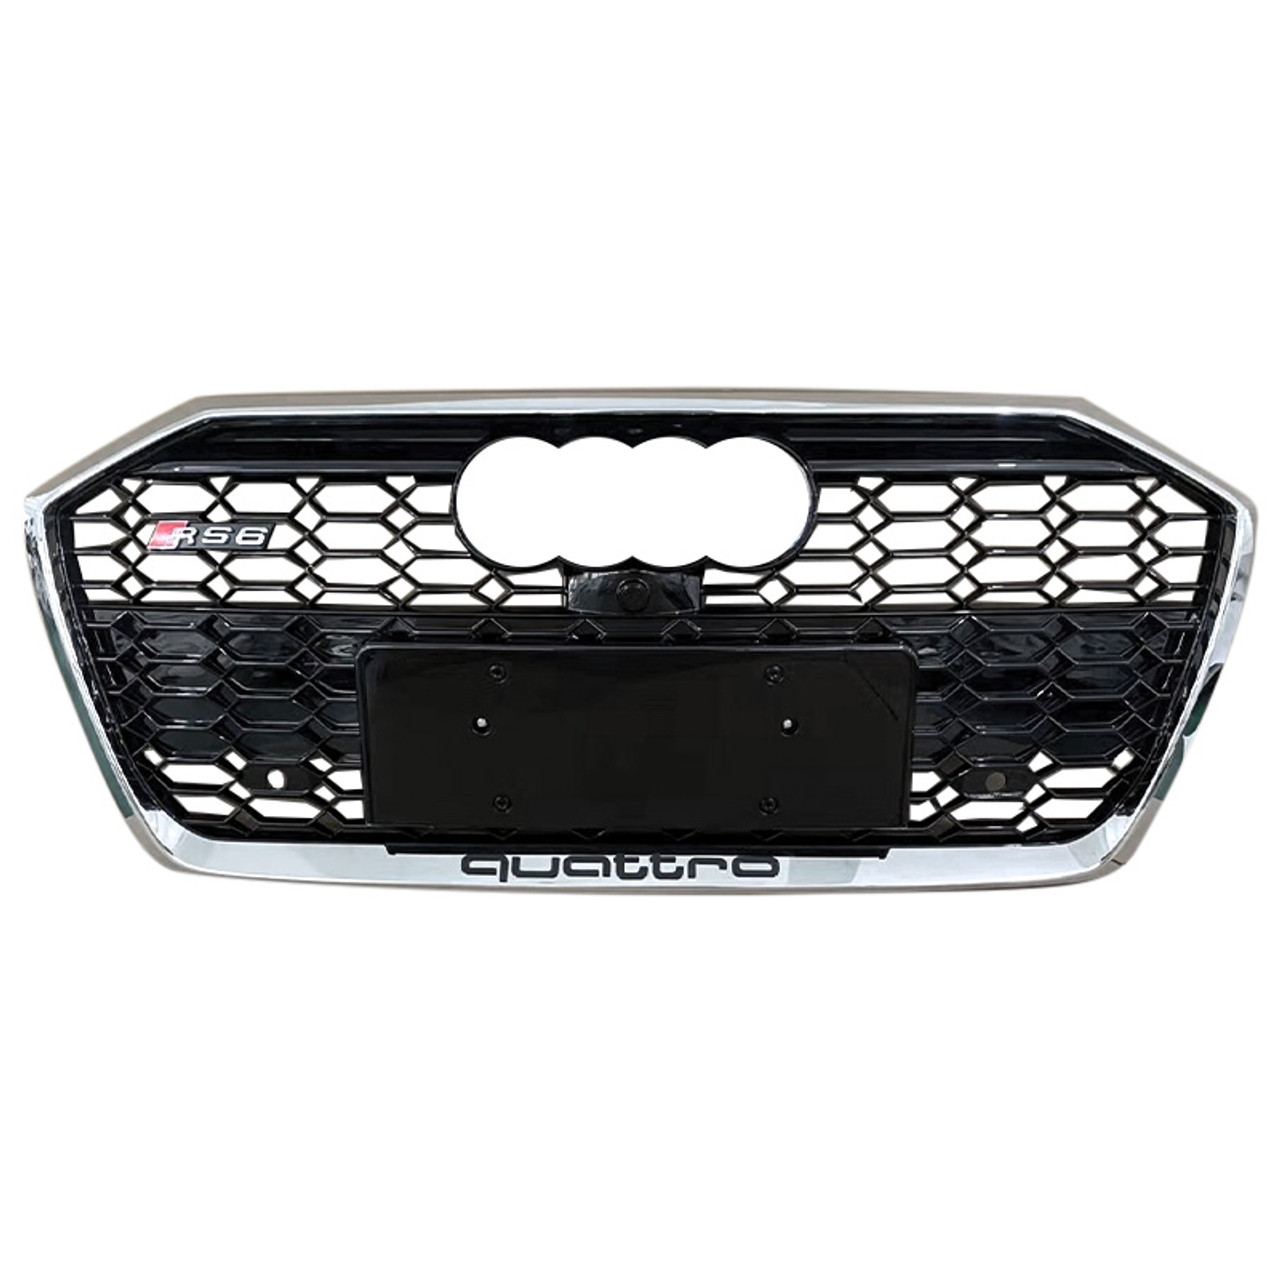 High Quality Car Grille for Audi A6 2019-2021 Year Change to S6 RS6 Model  Grille Car Accessories Auto Car Parts - China Body Kit, Car Grille